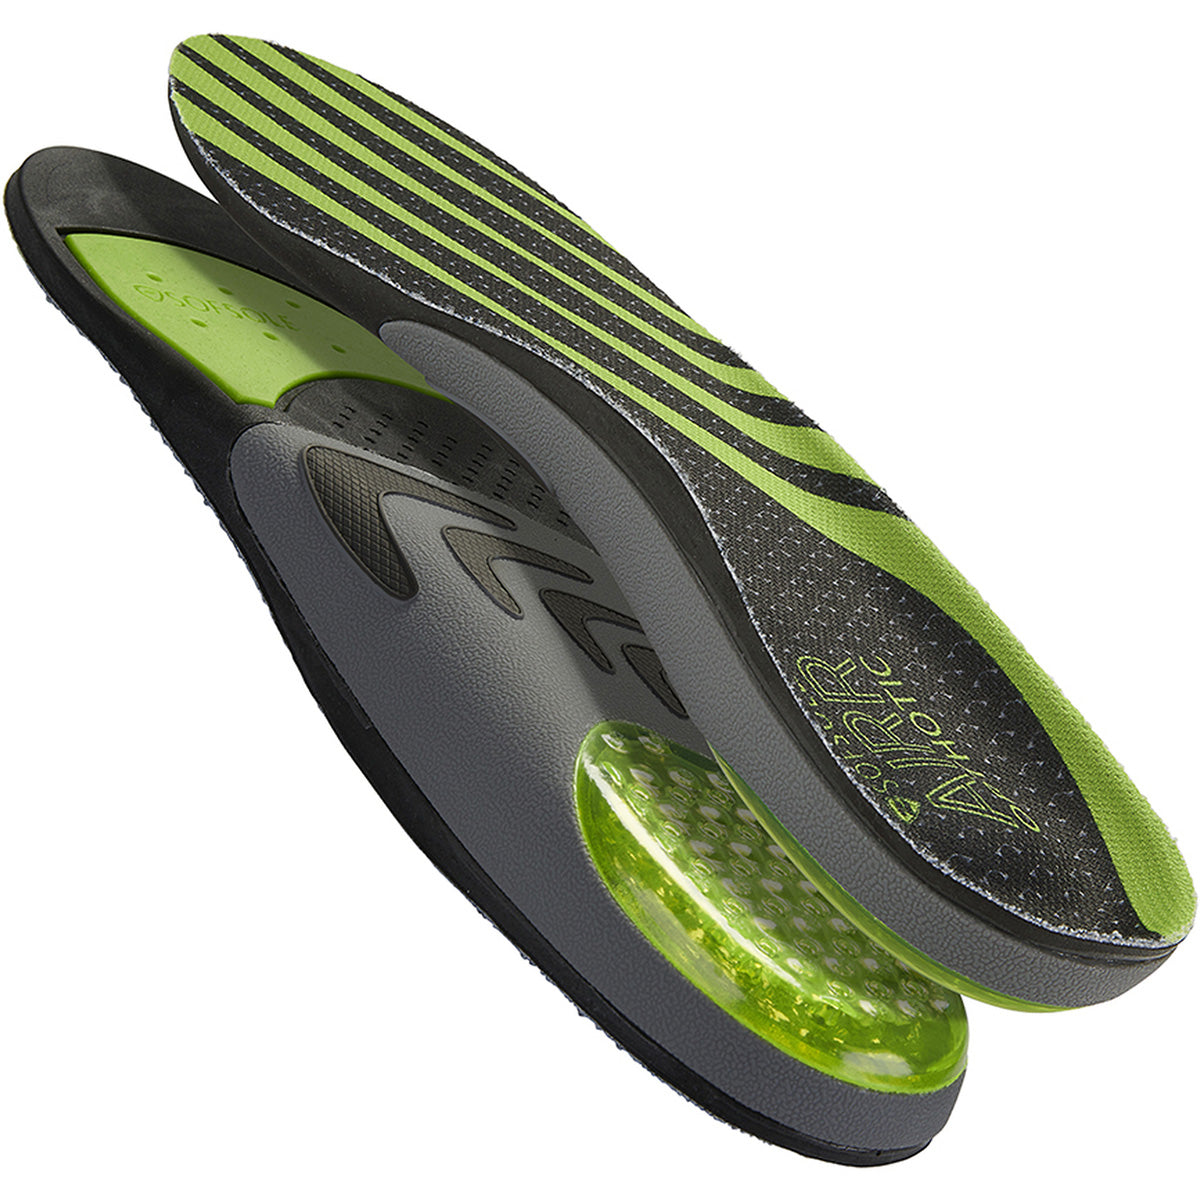 Sof Sole Airr Orthotic Full Length Shoe Insoles SofSole